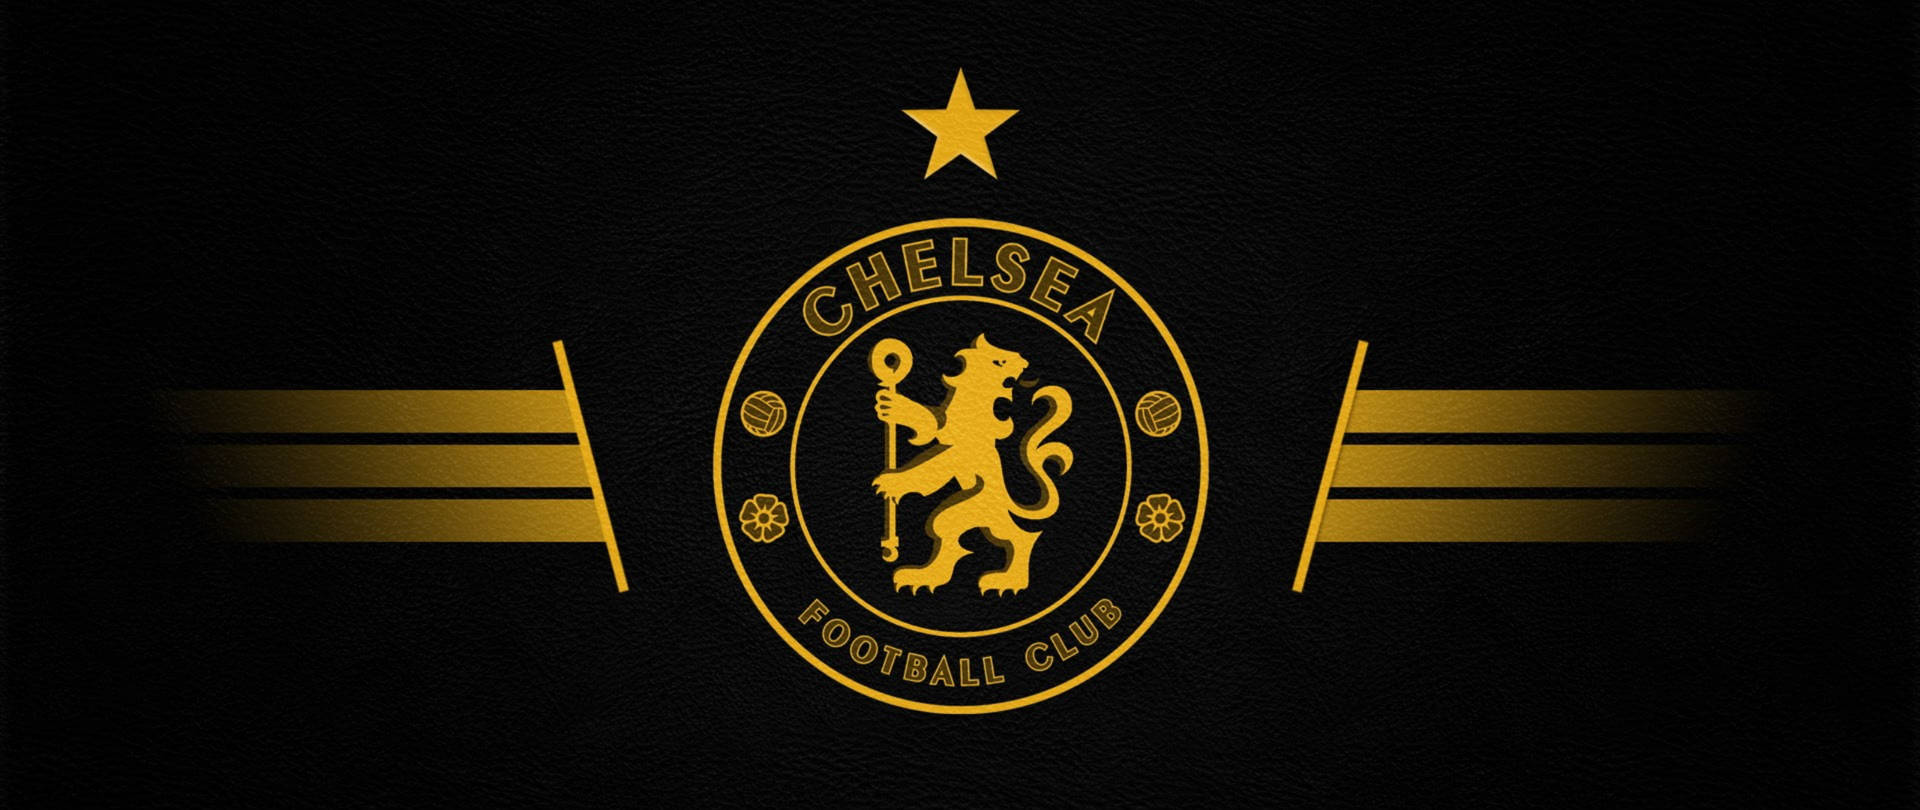 Chelsea Logo With Star Wallpaper